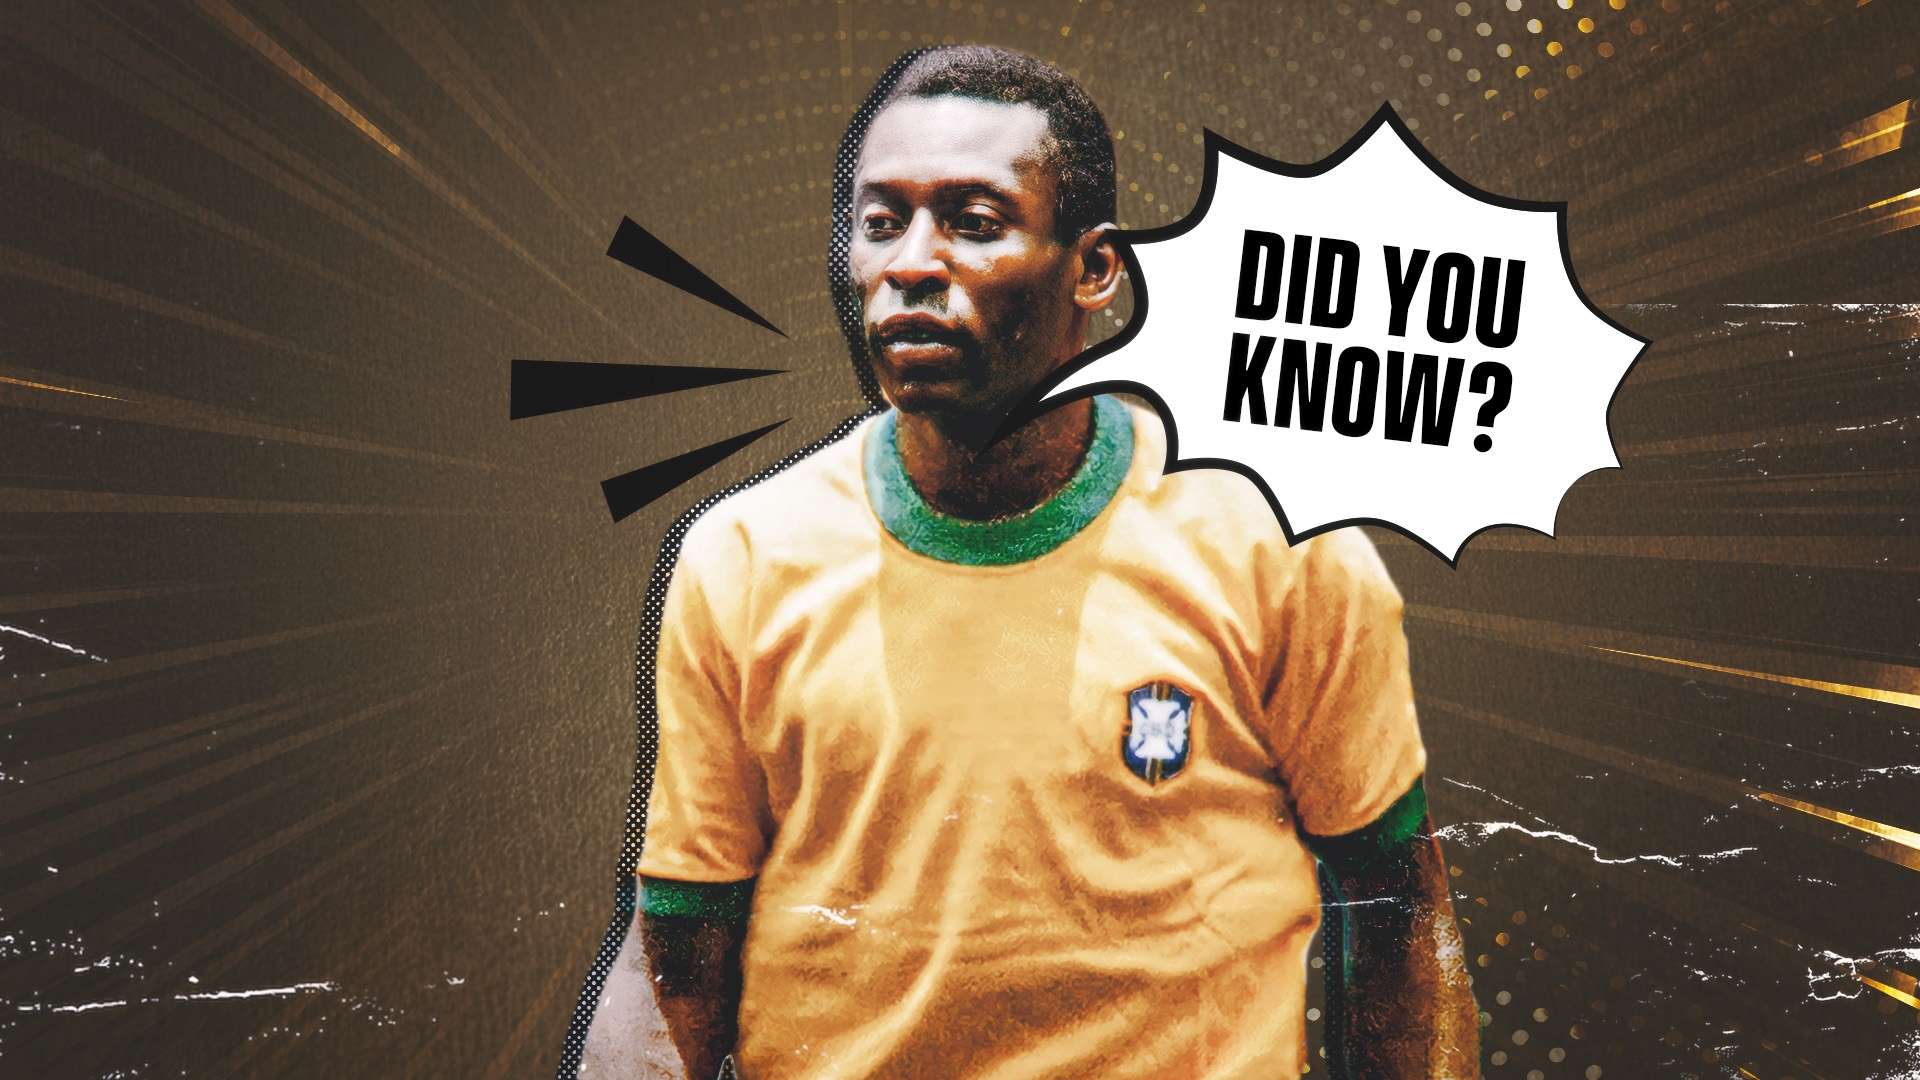 Pele Did you know fan facts